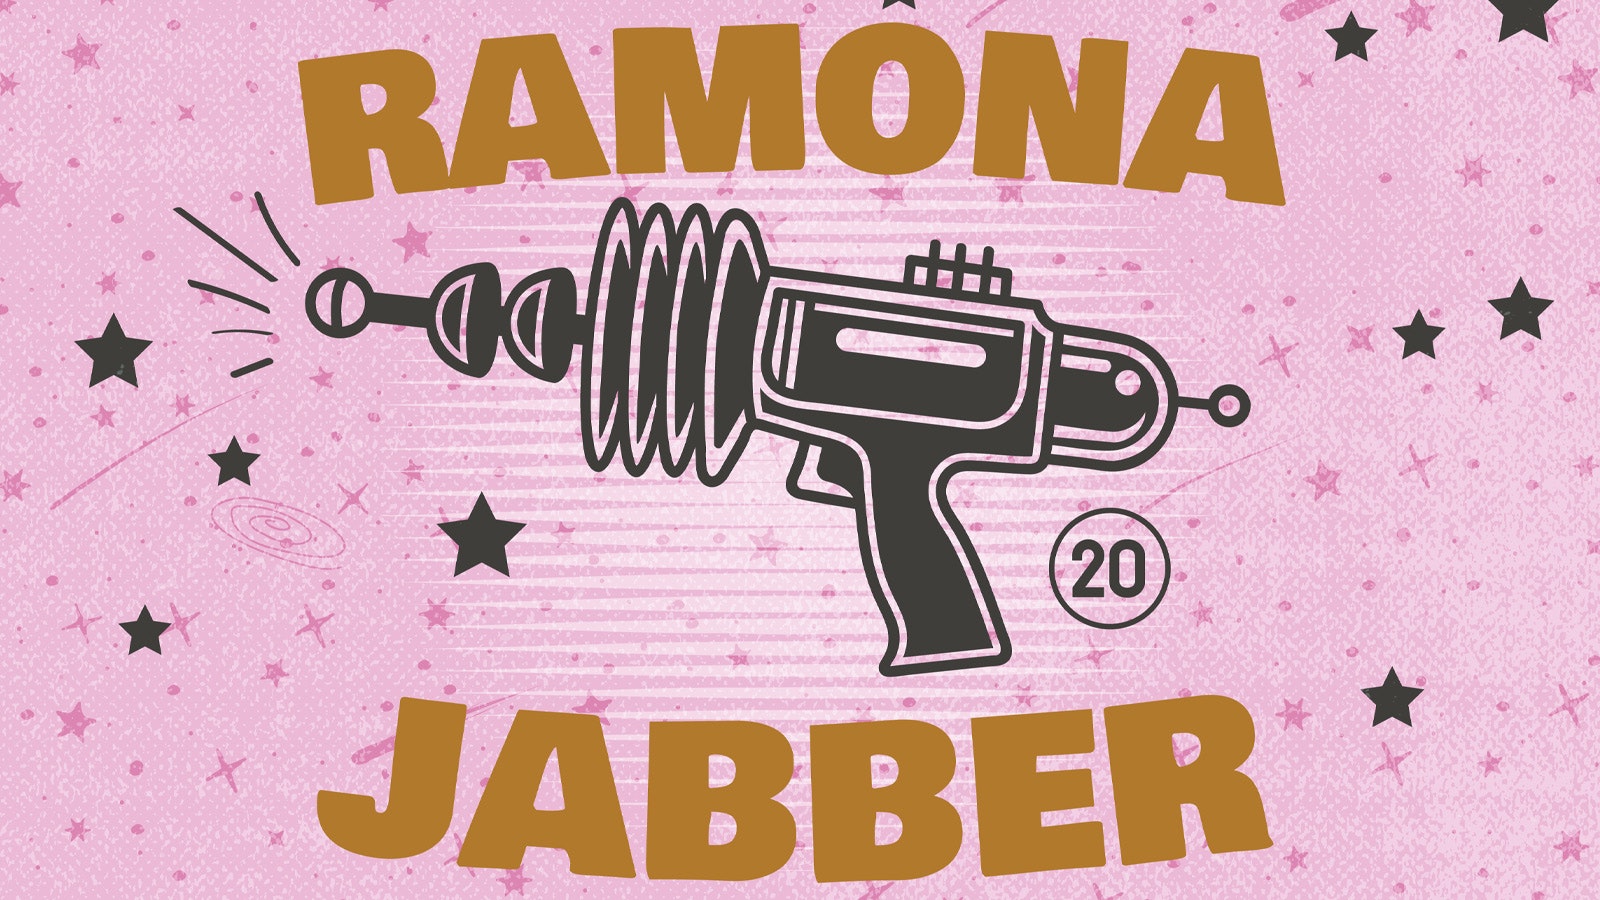 *CANCELLED* Ramona (US) + Jabber (US) + Guests